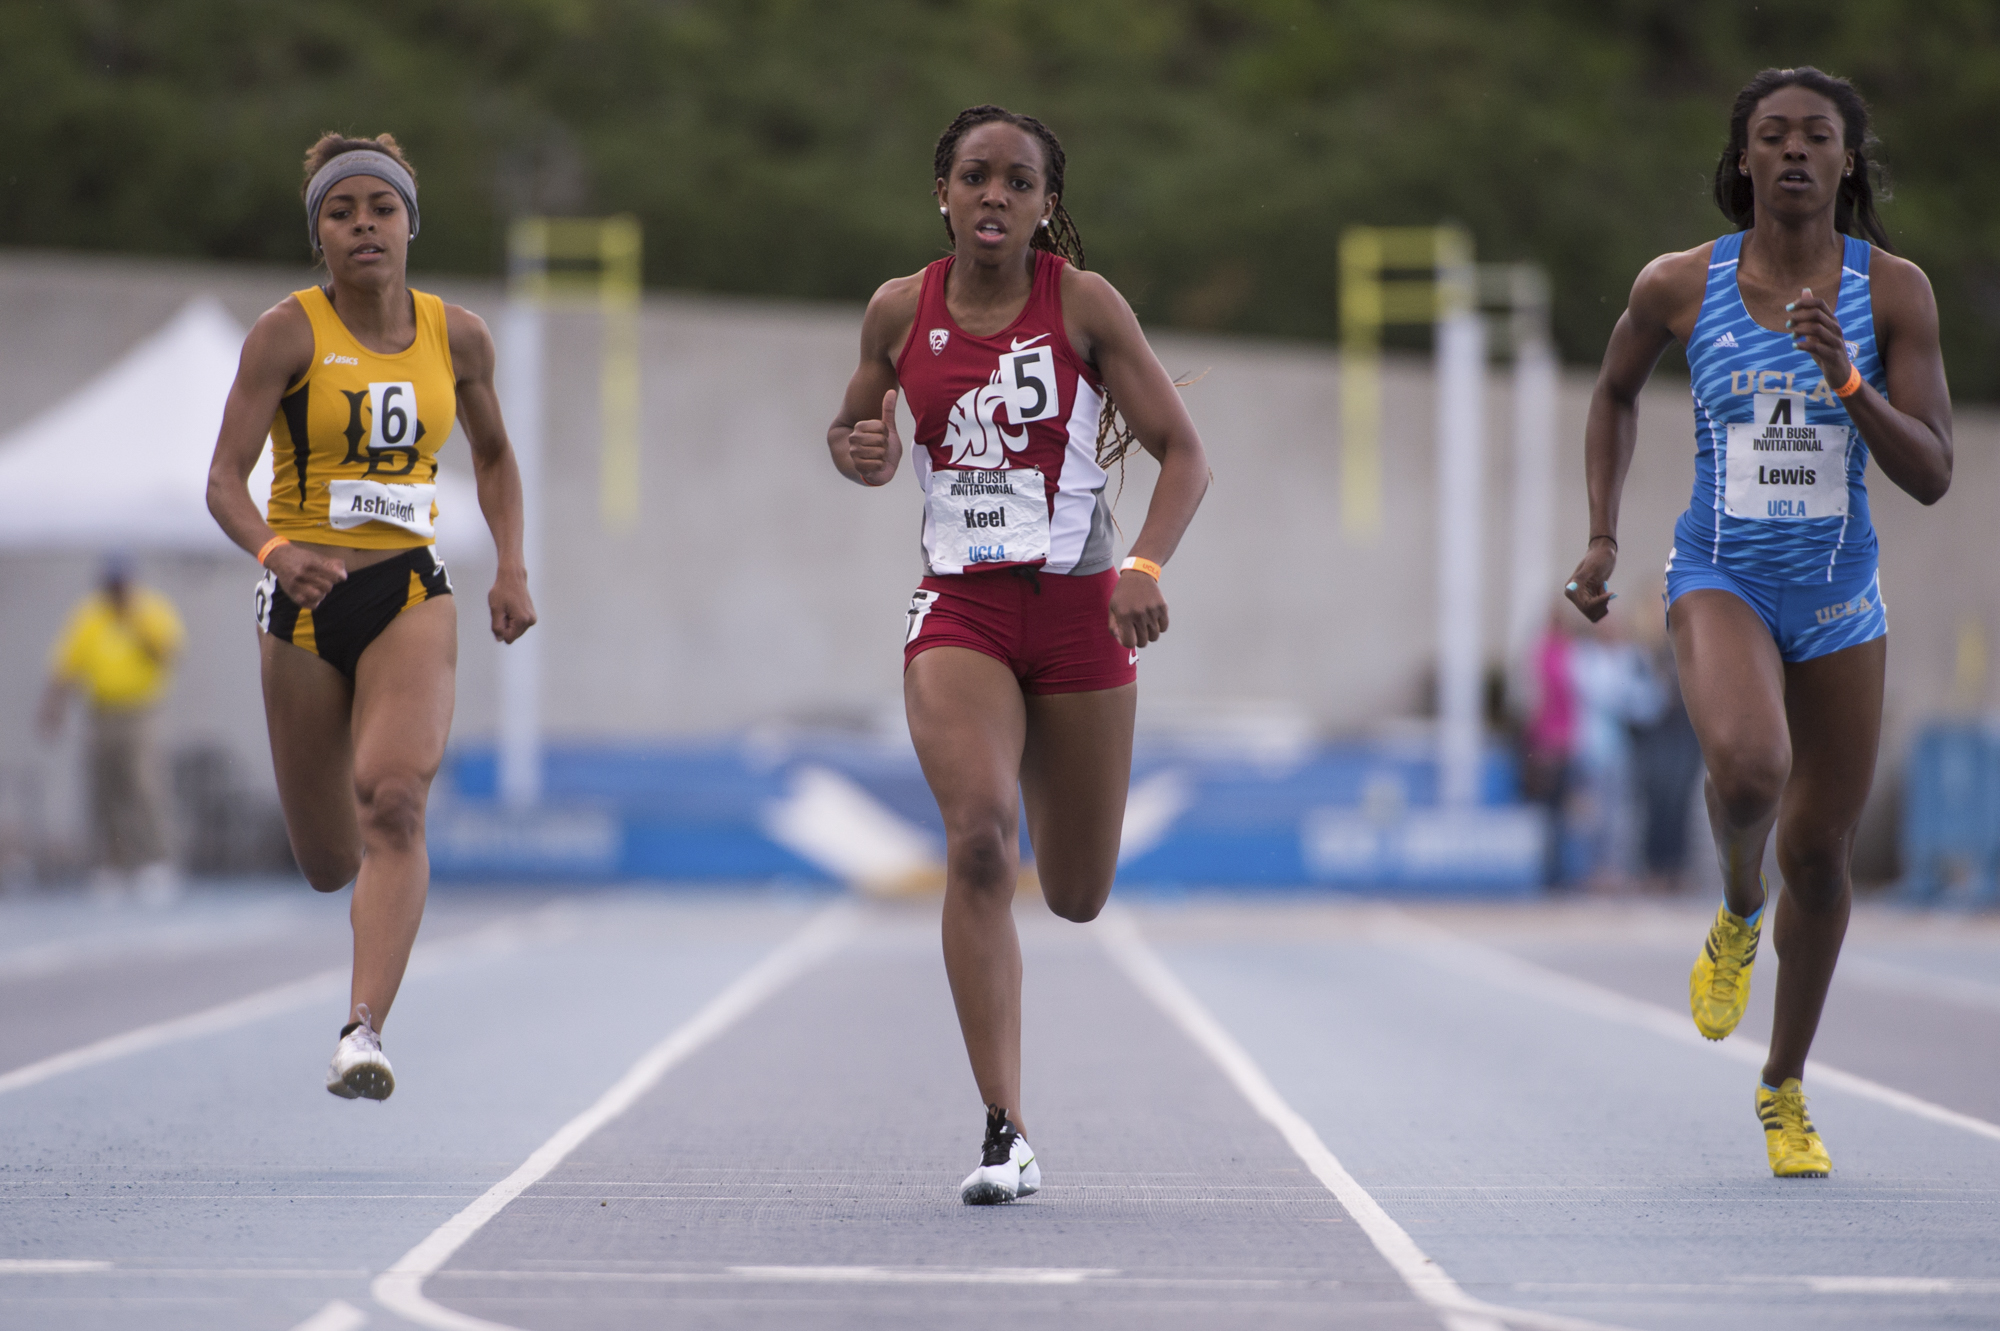 Exceptional Senior” shines on the track and in the classroom ...